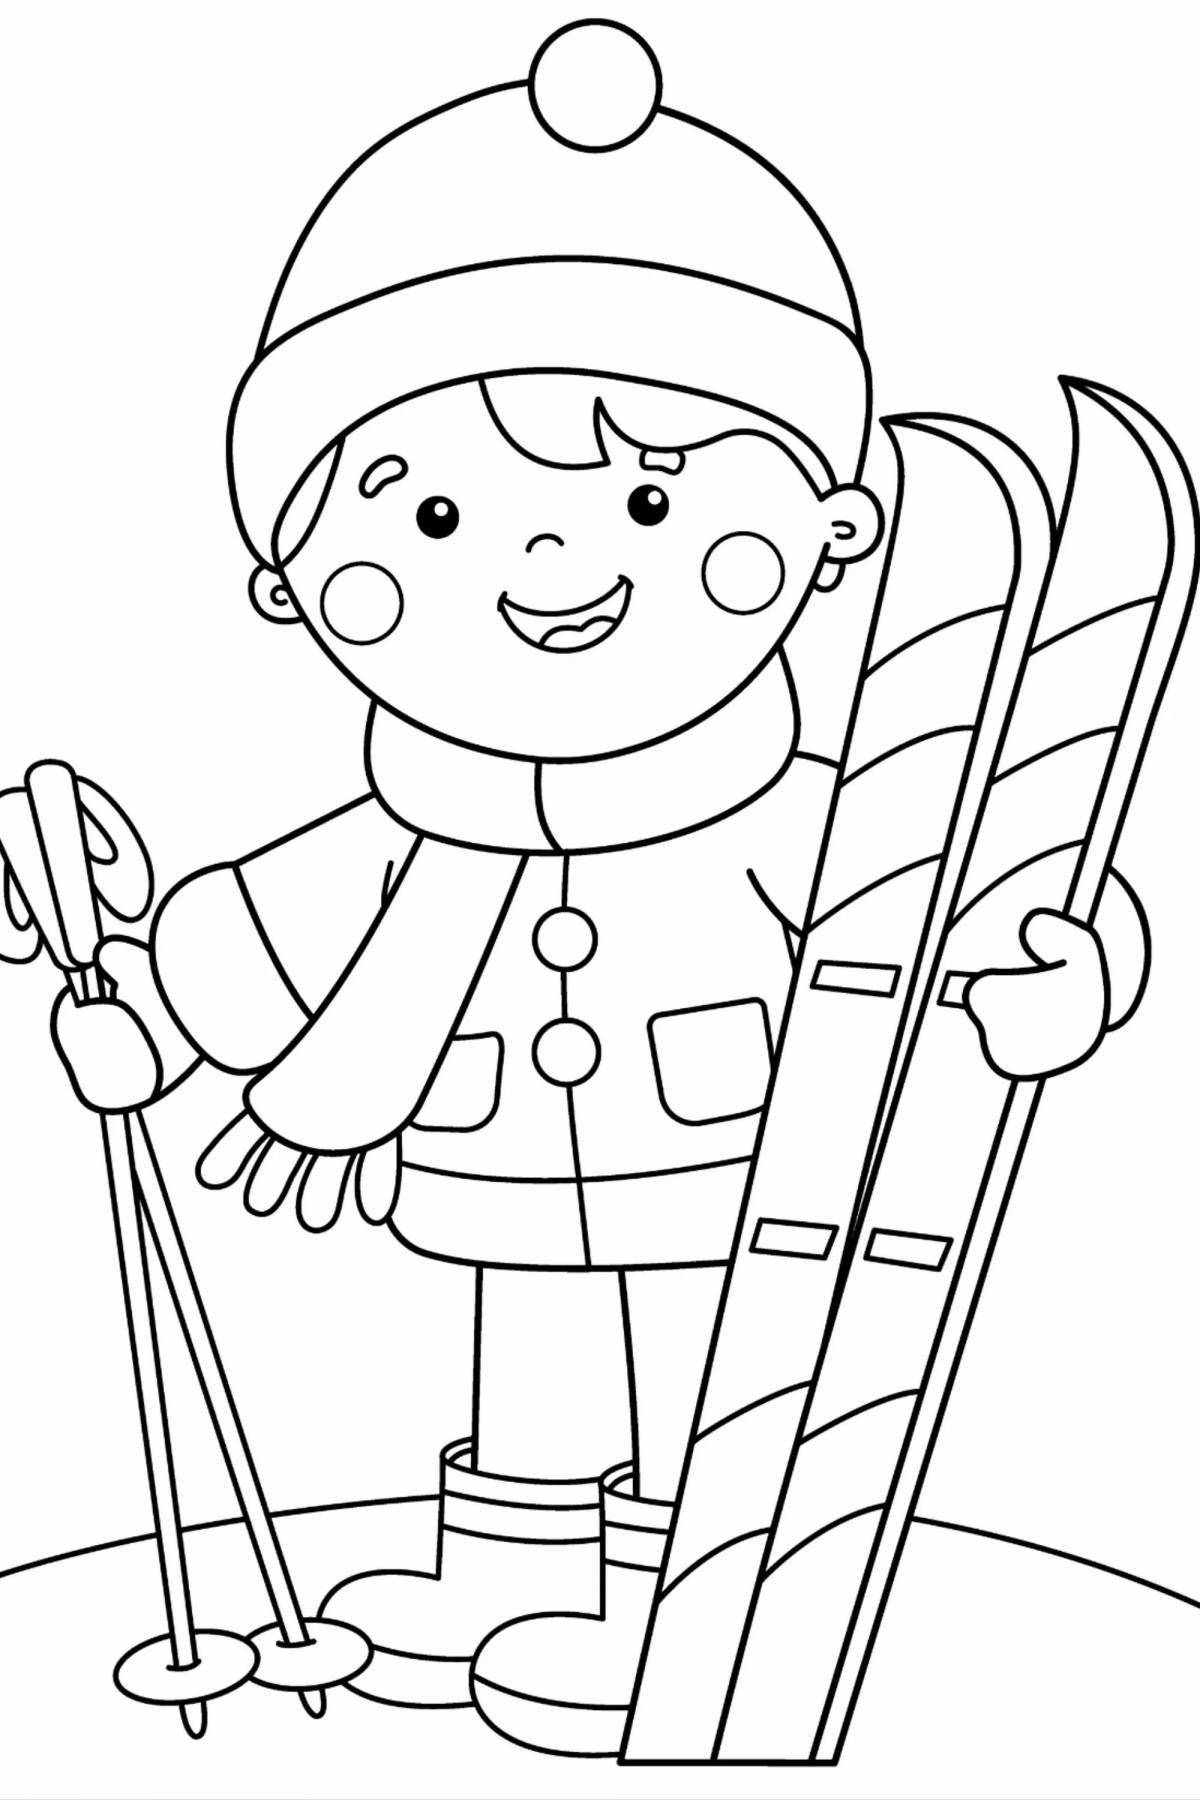 Adventurous skier coloring book for 5-6 year olds